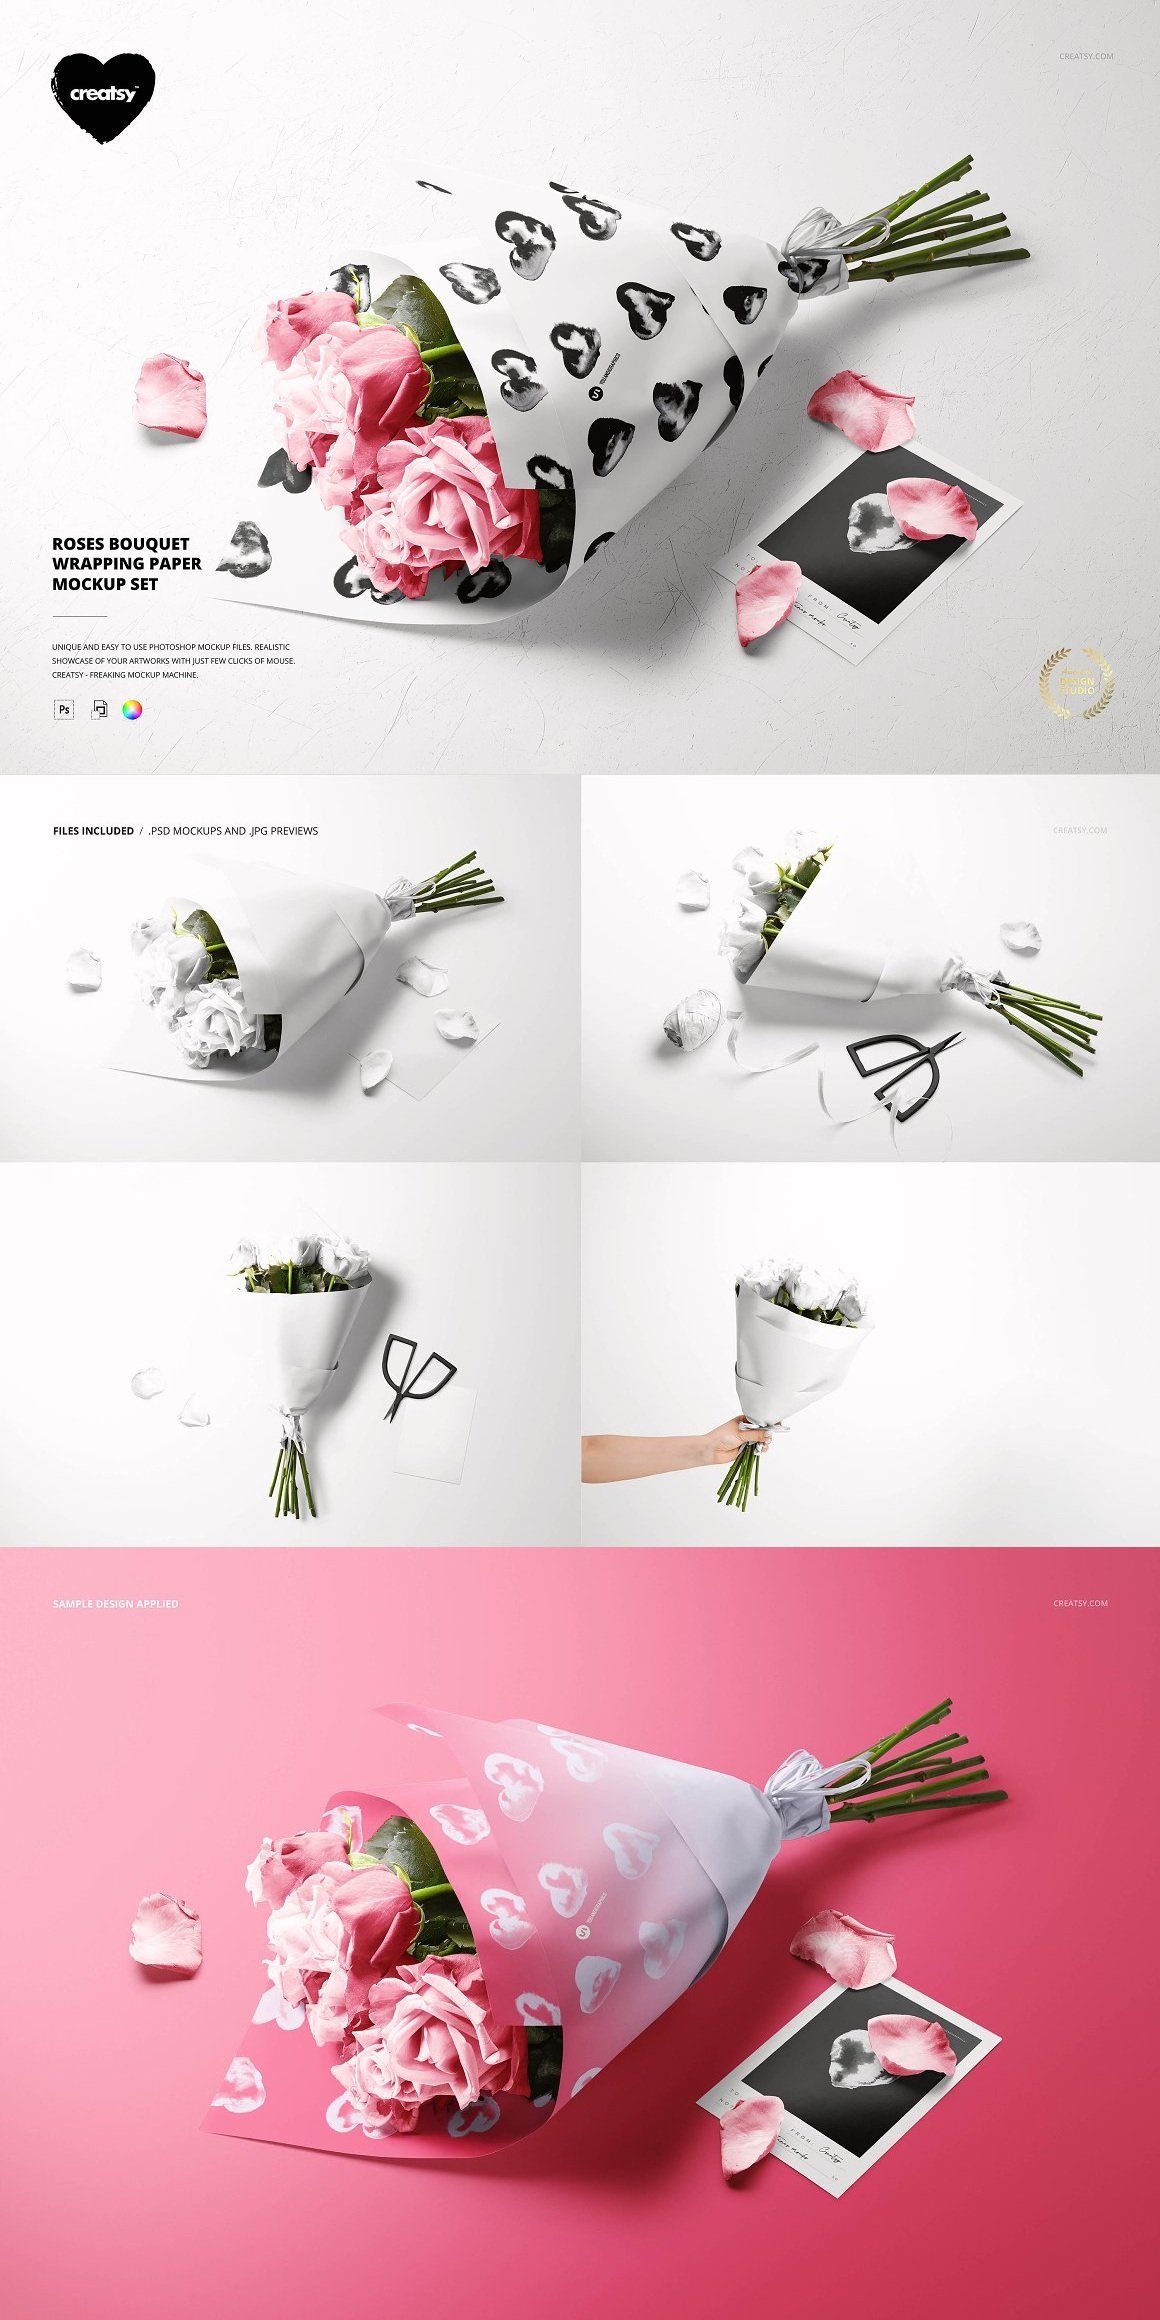 Download Download CreativeMarket - Roses Bouquet Wrapping Paper Mockup 5884381 - SoftArchive